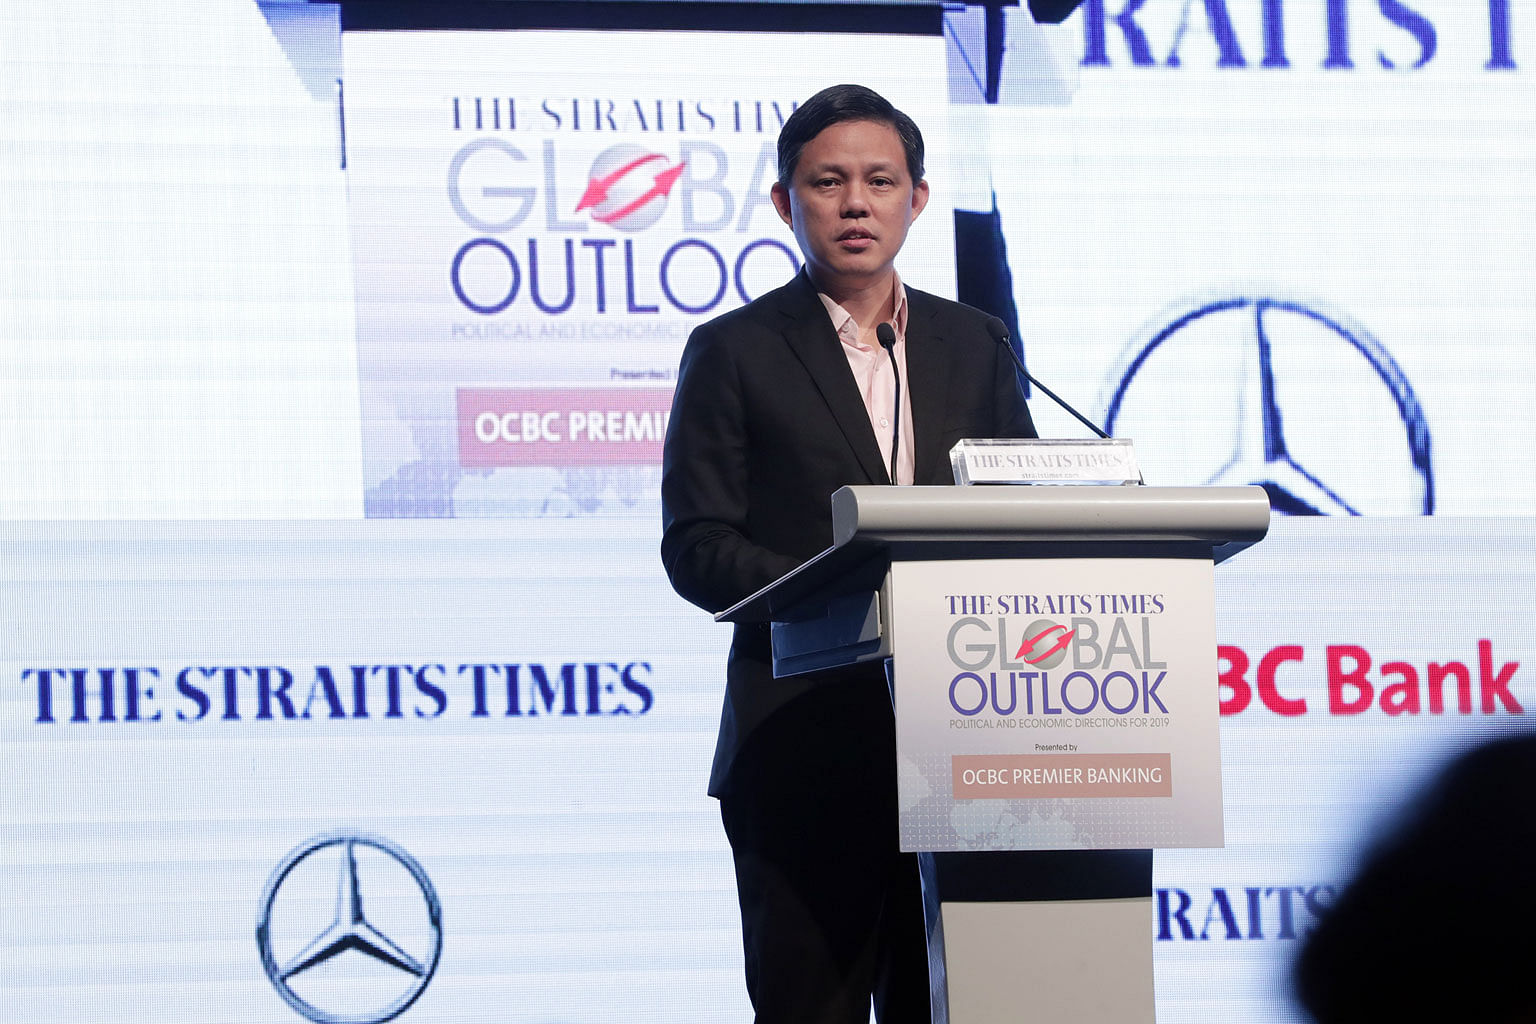 Trade and Industry Minister Chan Chun Sing giving the keynote address at The Straits Times Global Outlook Forum held at Raffles City Convention Centre yesterday. He says globalisation will bring forth its fair share of challenges and opportunities, a